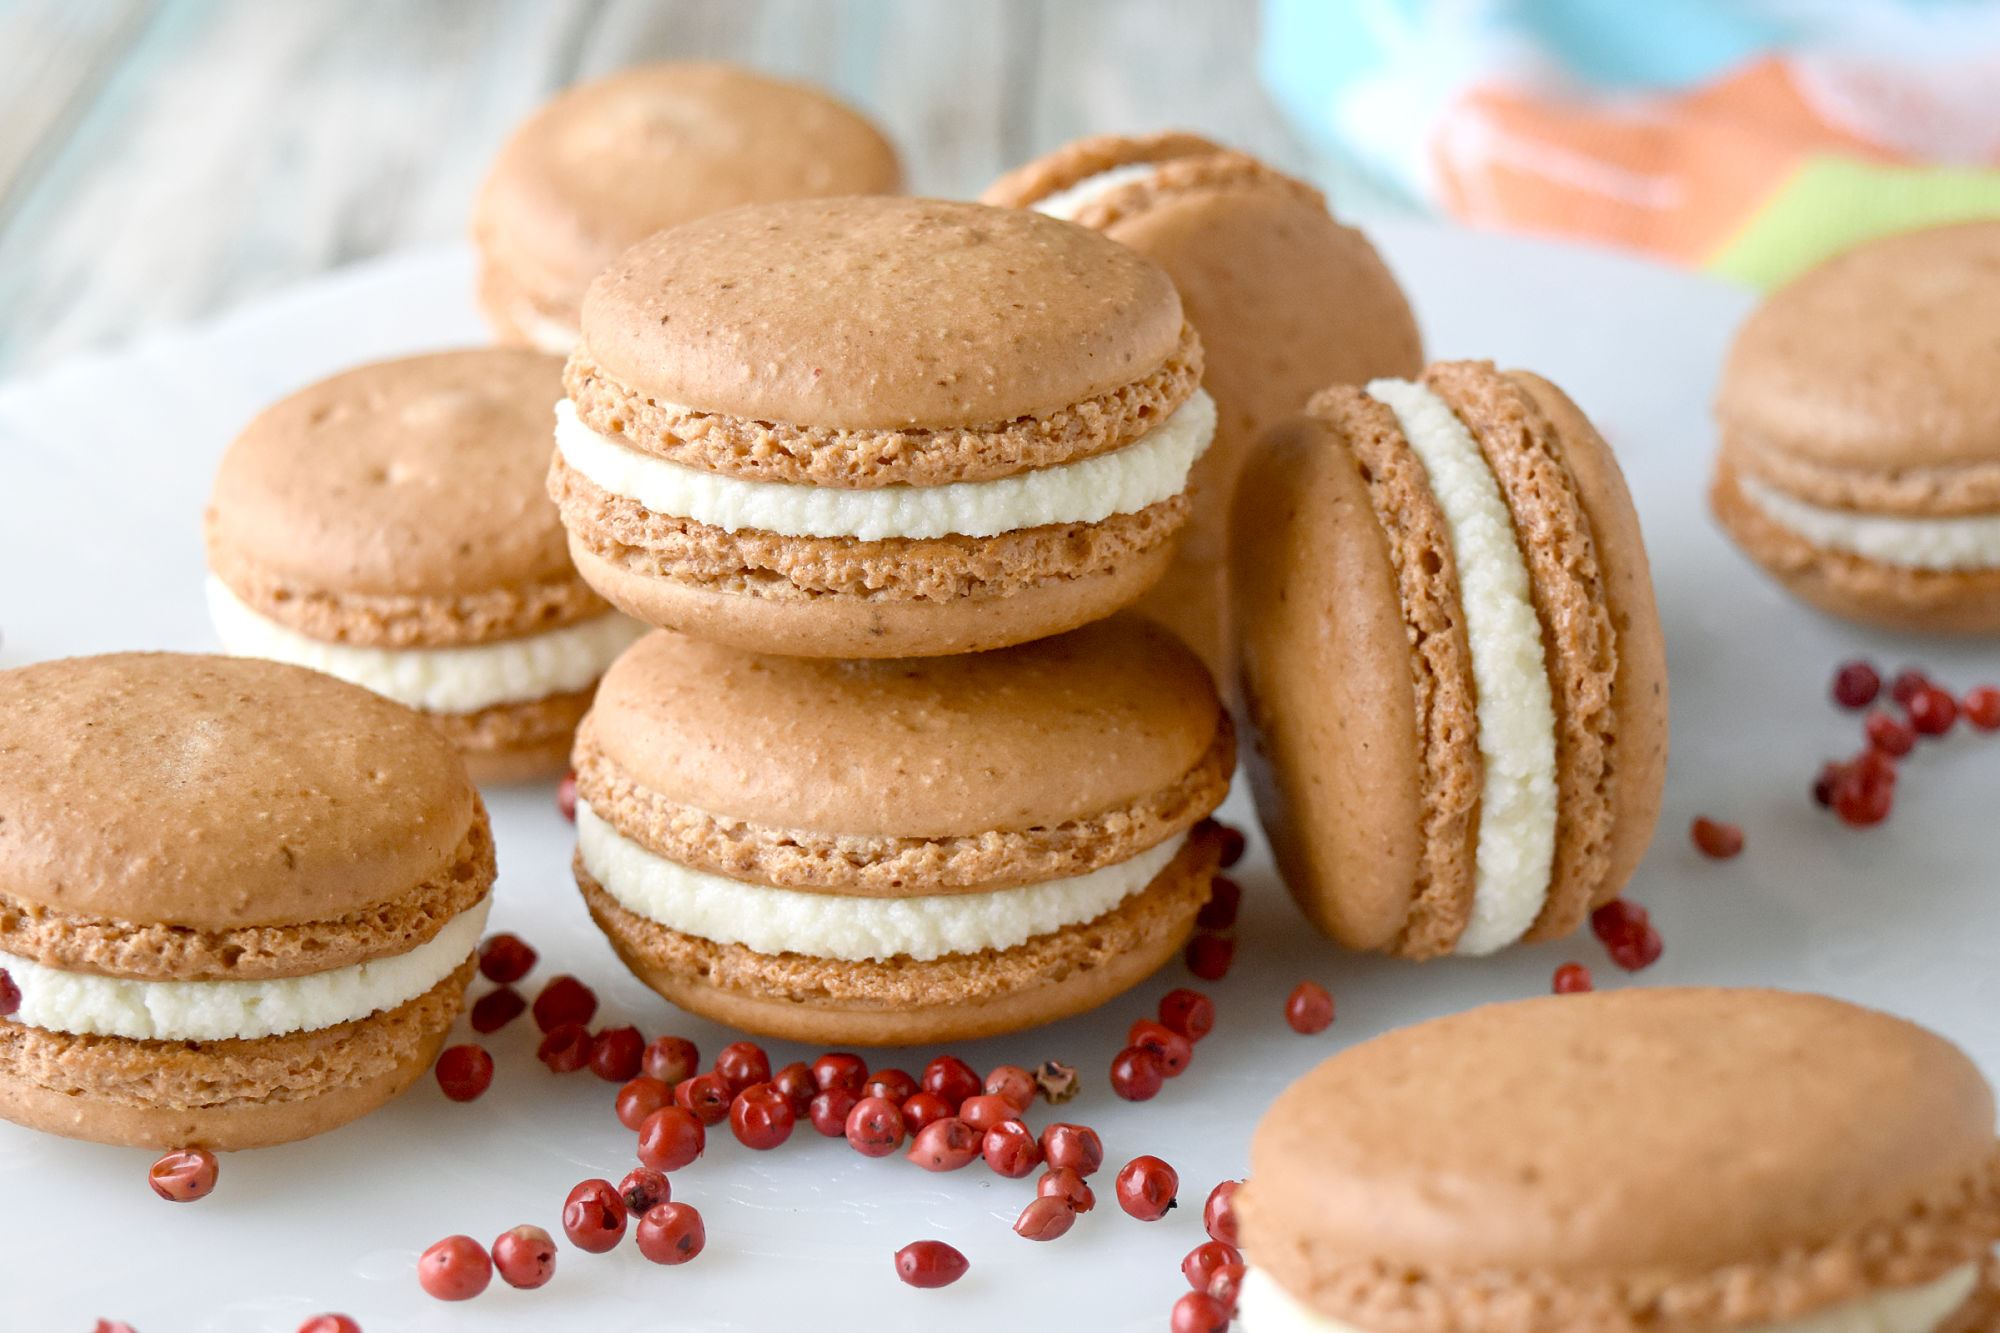 Strawberry Pink Peppercorn Macaron have strawberry and pink peppercorn in the shell. They have the flavor of pepper without the heat making their flavor delicate and delicious. #SpringSweetsWeek #macaronporn #macaronlove #pinkpeppercorns